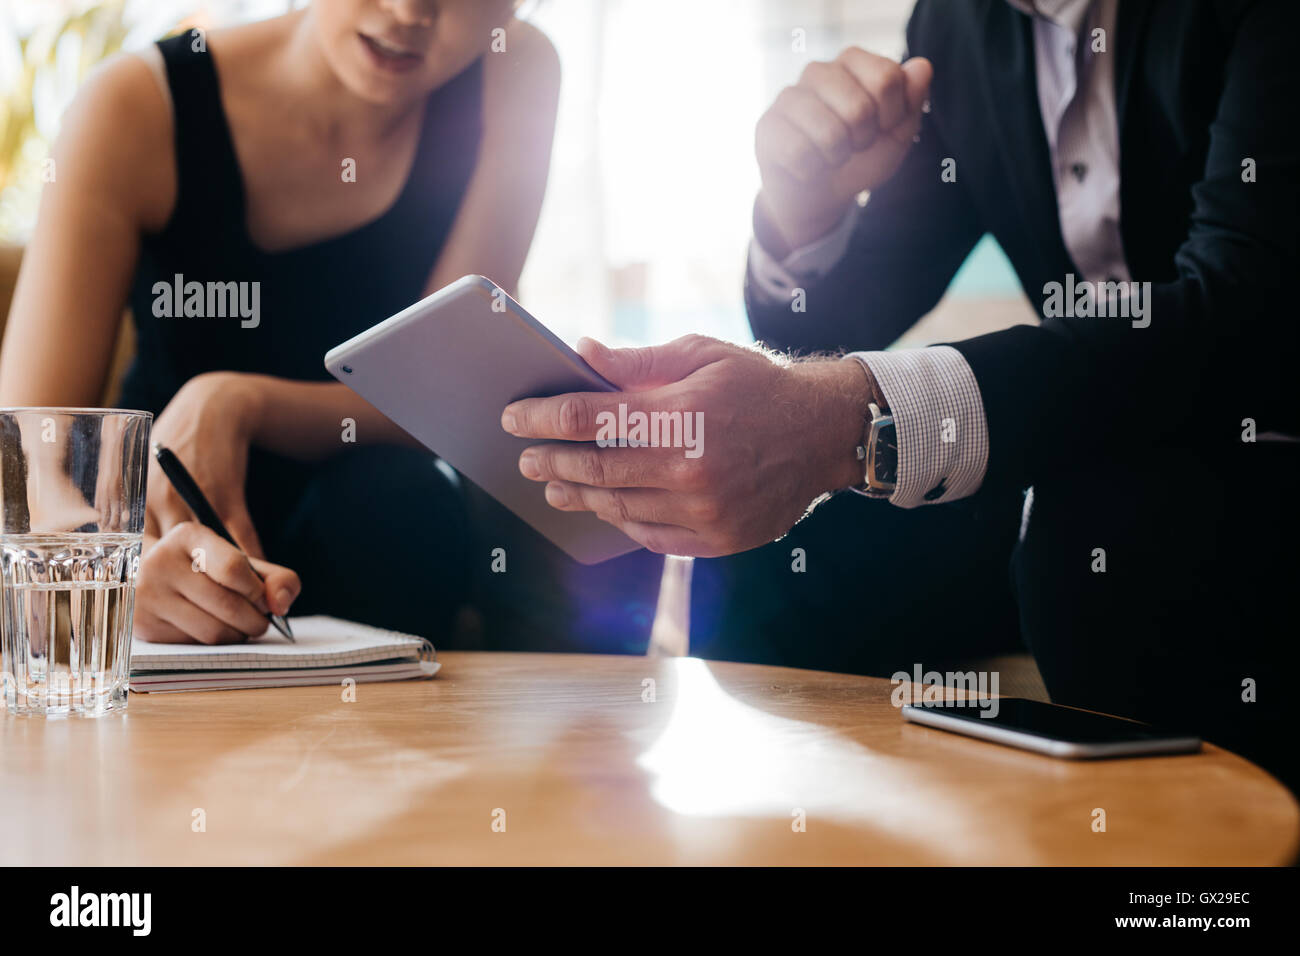 Business colleagues working together in office, focus on man using electronic organizer in foreground and woman writing notes. Stock Photo